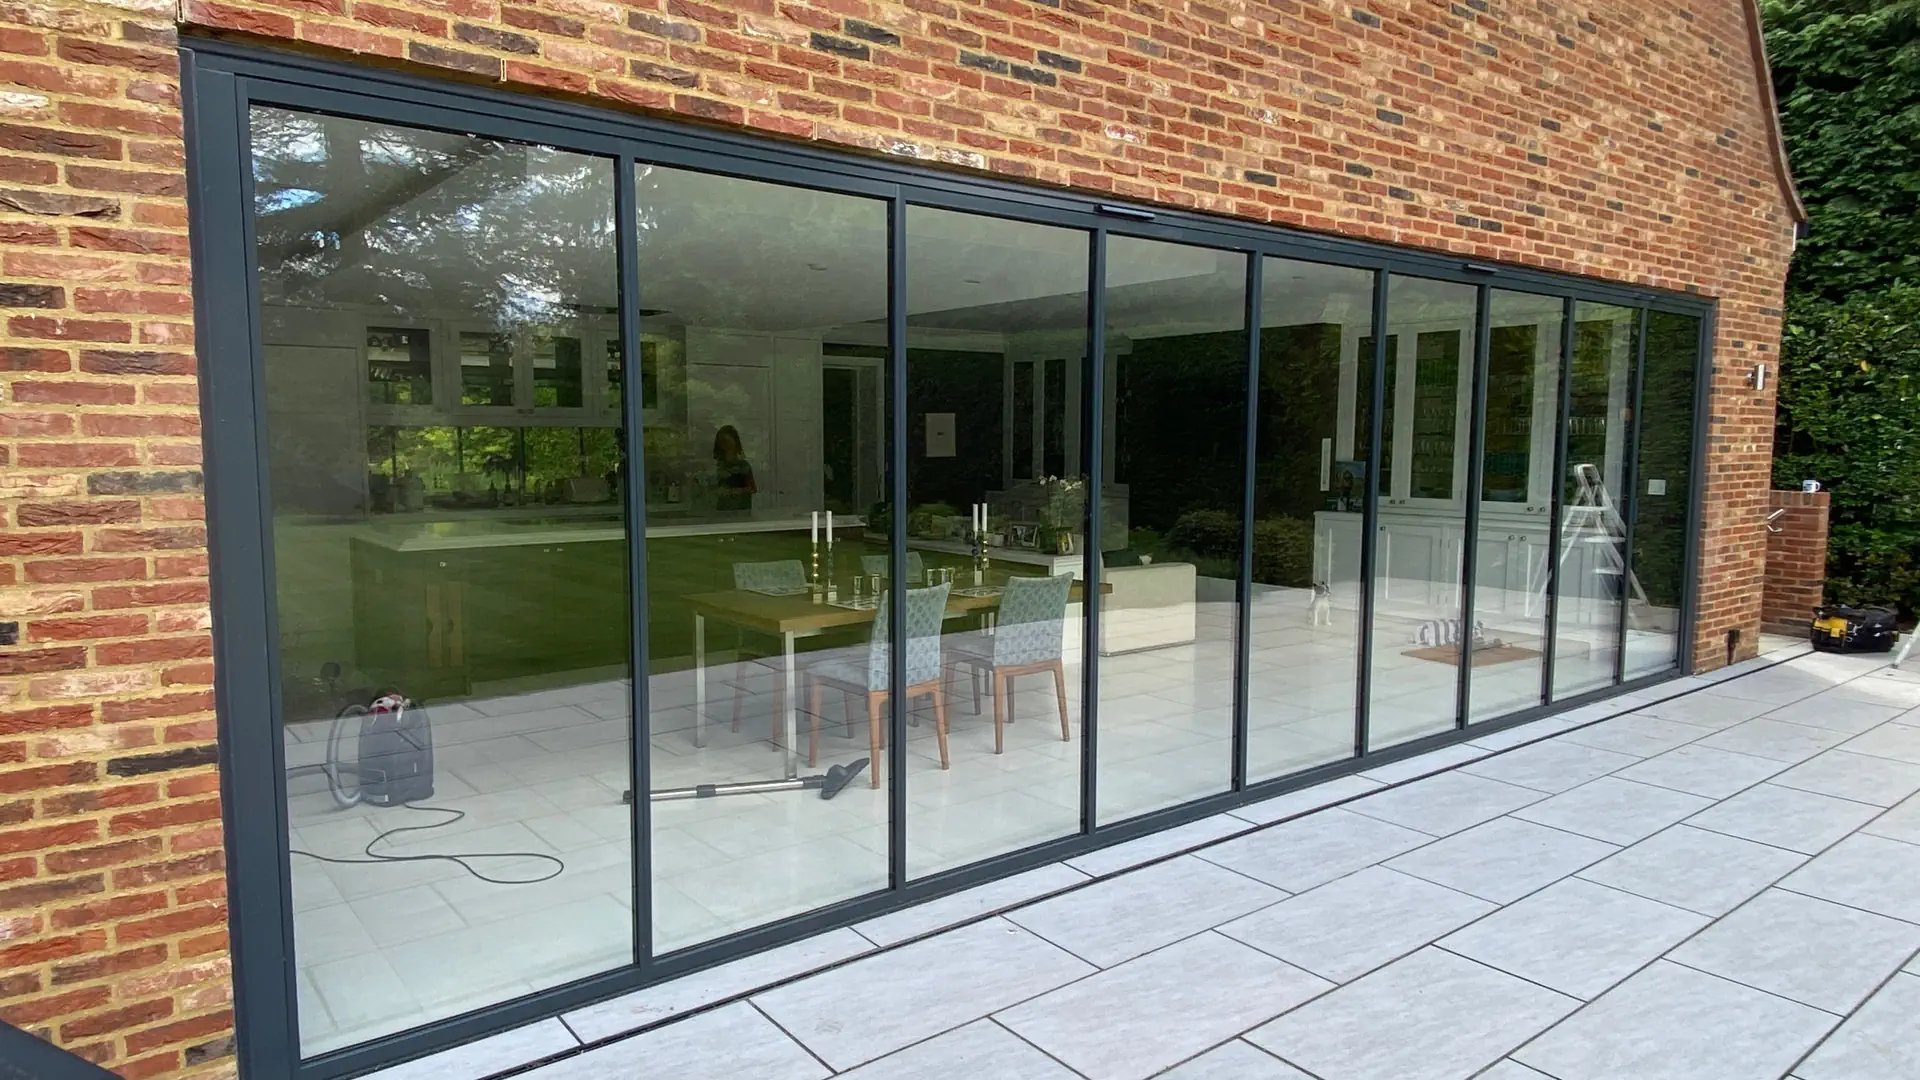 Ultra slim bifold doors between an open plan kitchen and patio in a modern brick home in the UK